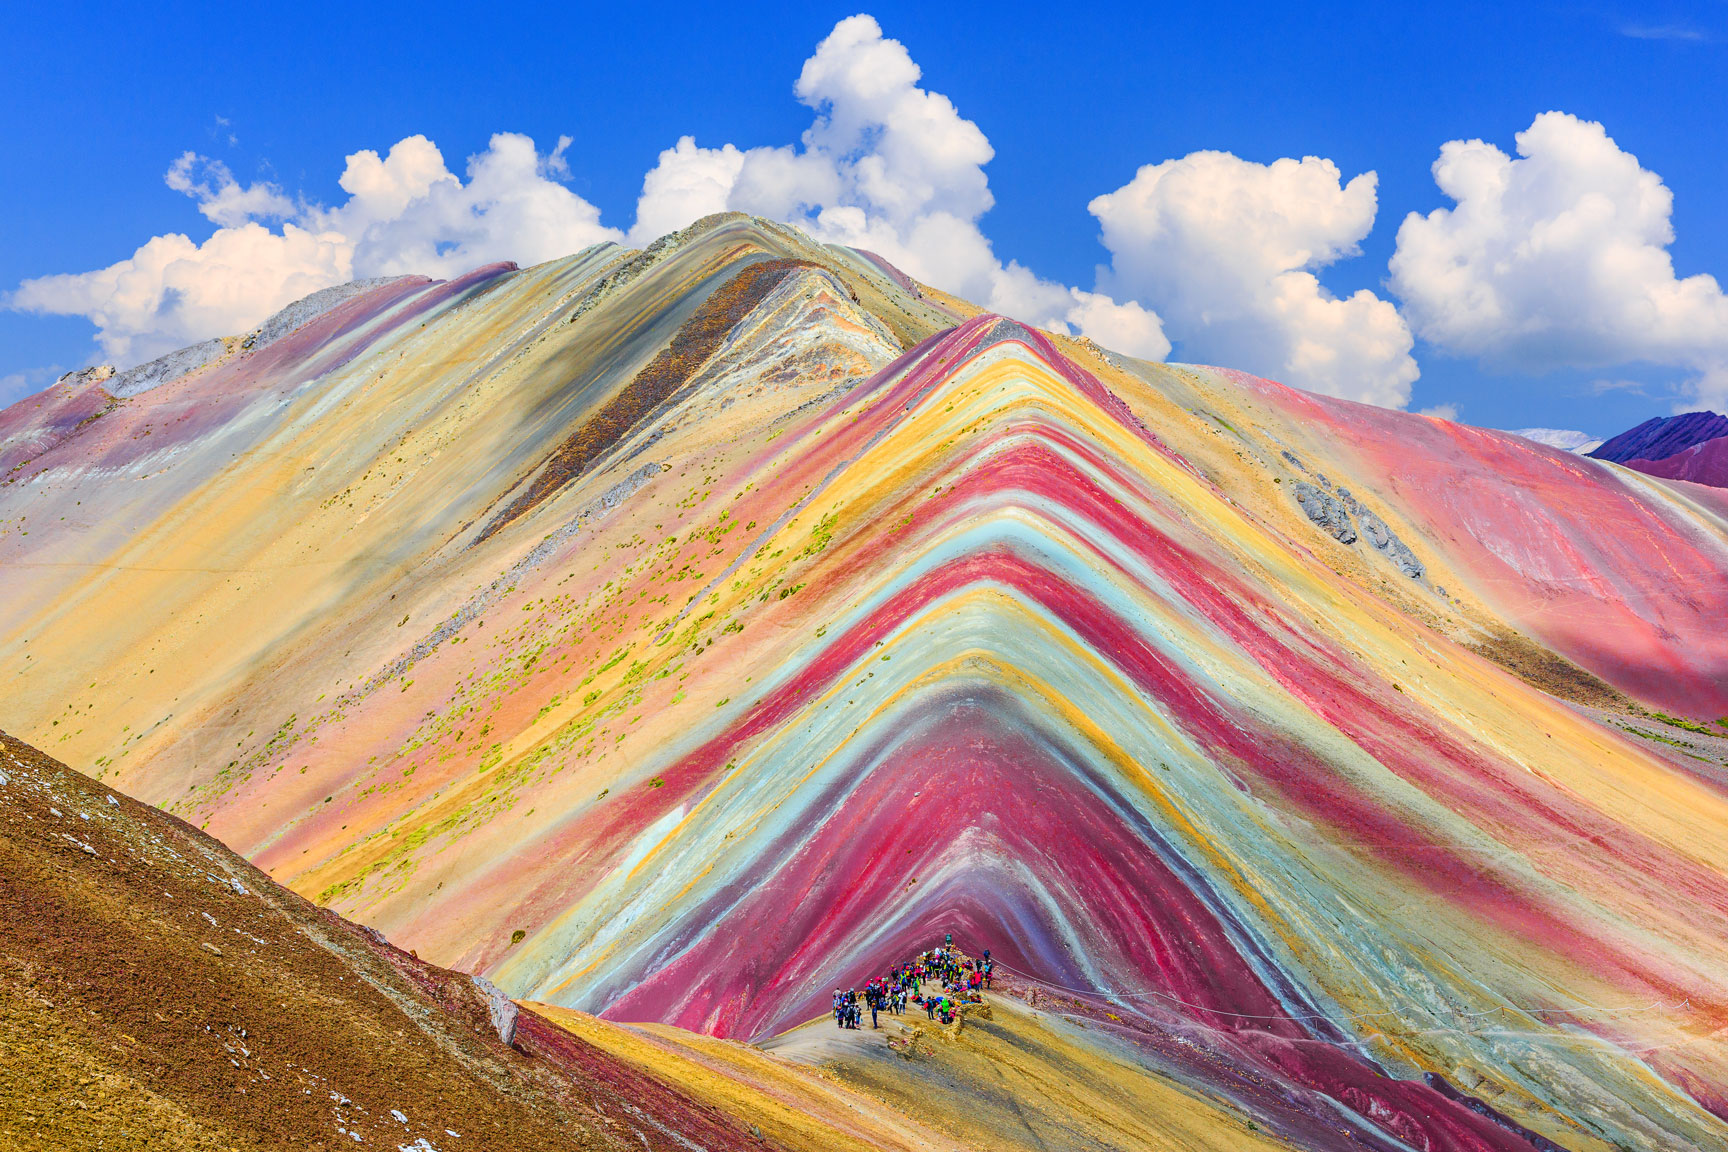 hikers visiting the rainbow mountains in peru